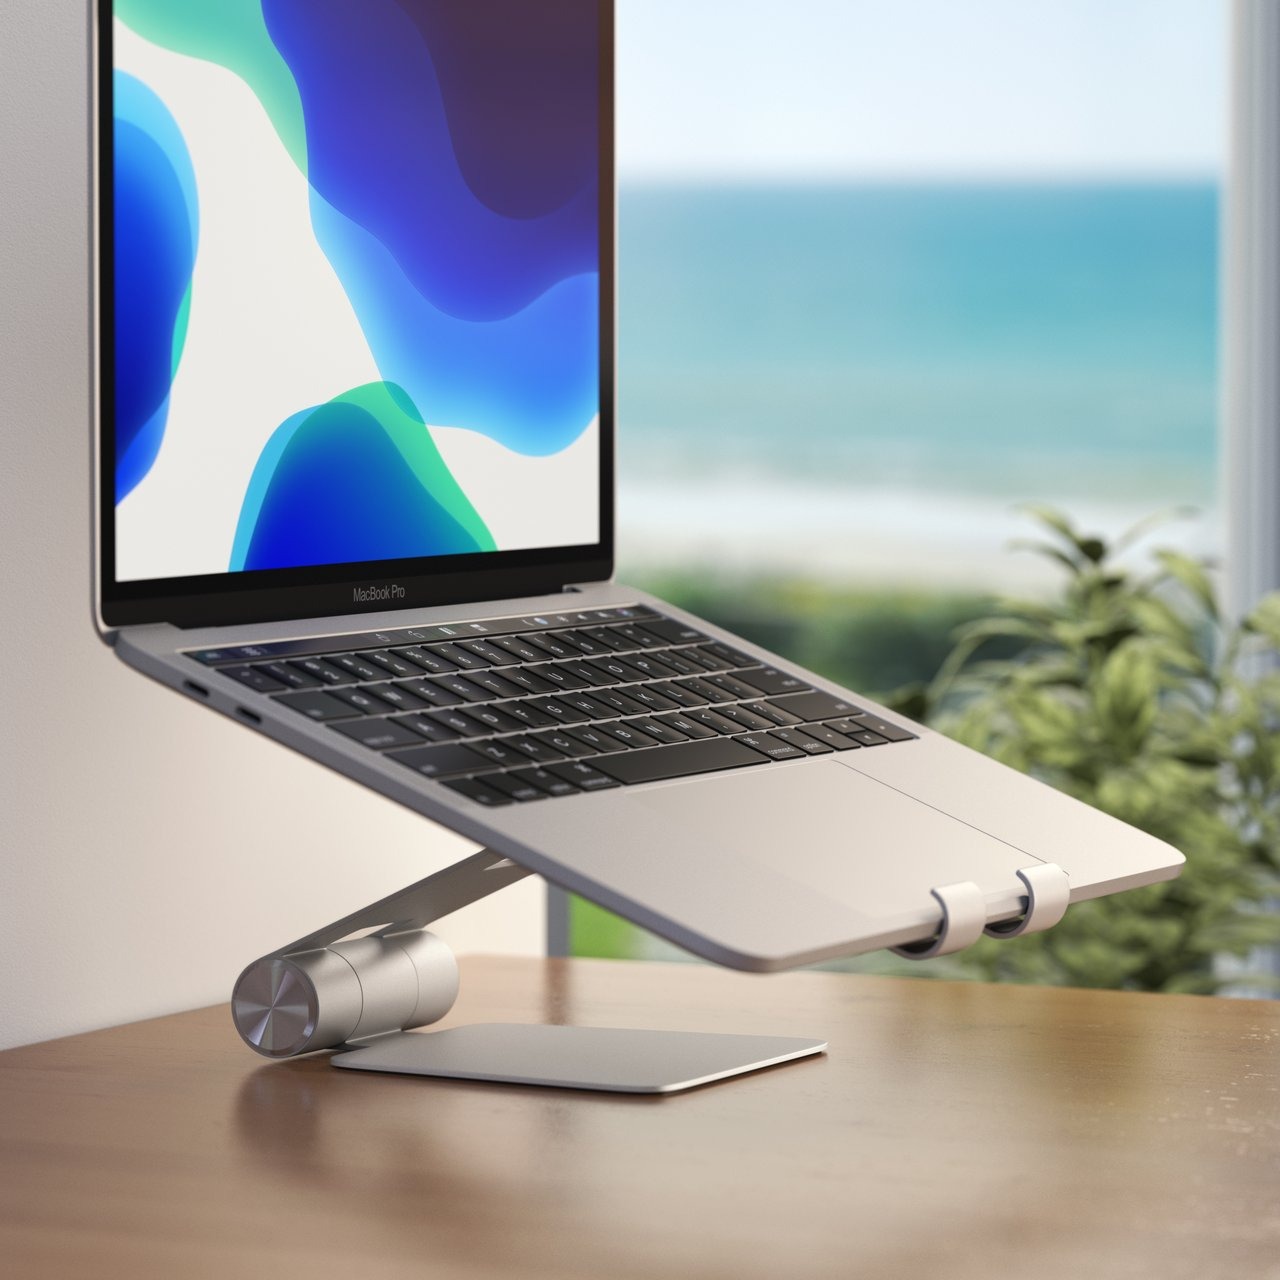 Satechi R1 Tablet Stand - with laptop